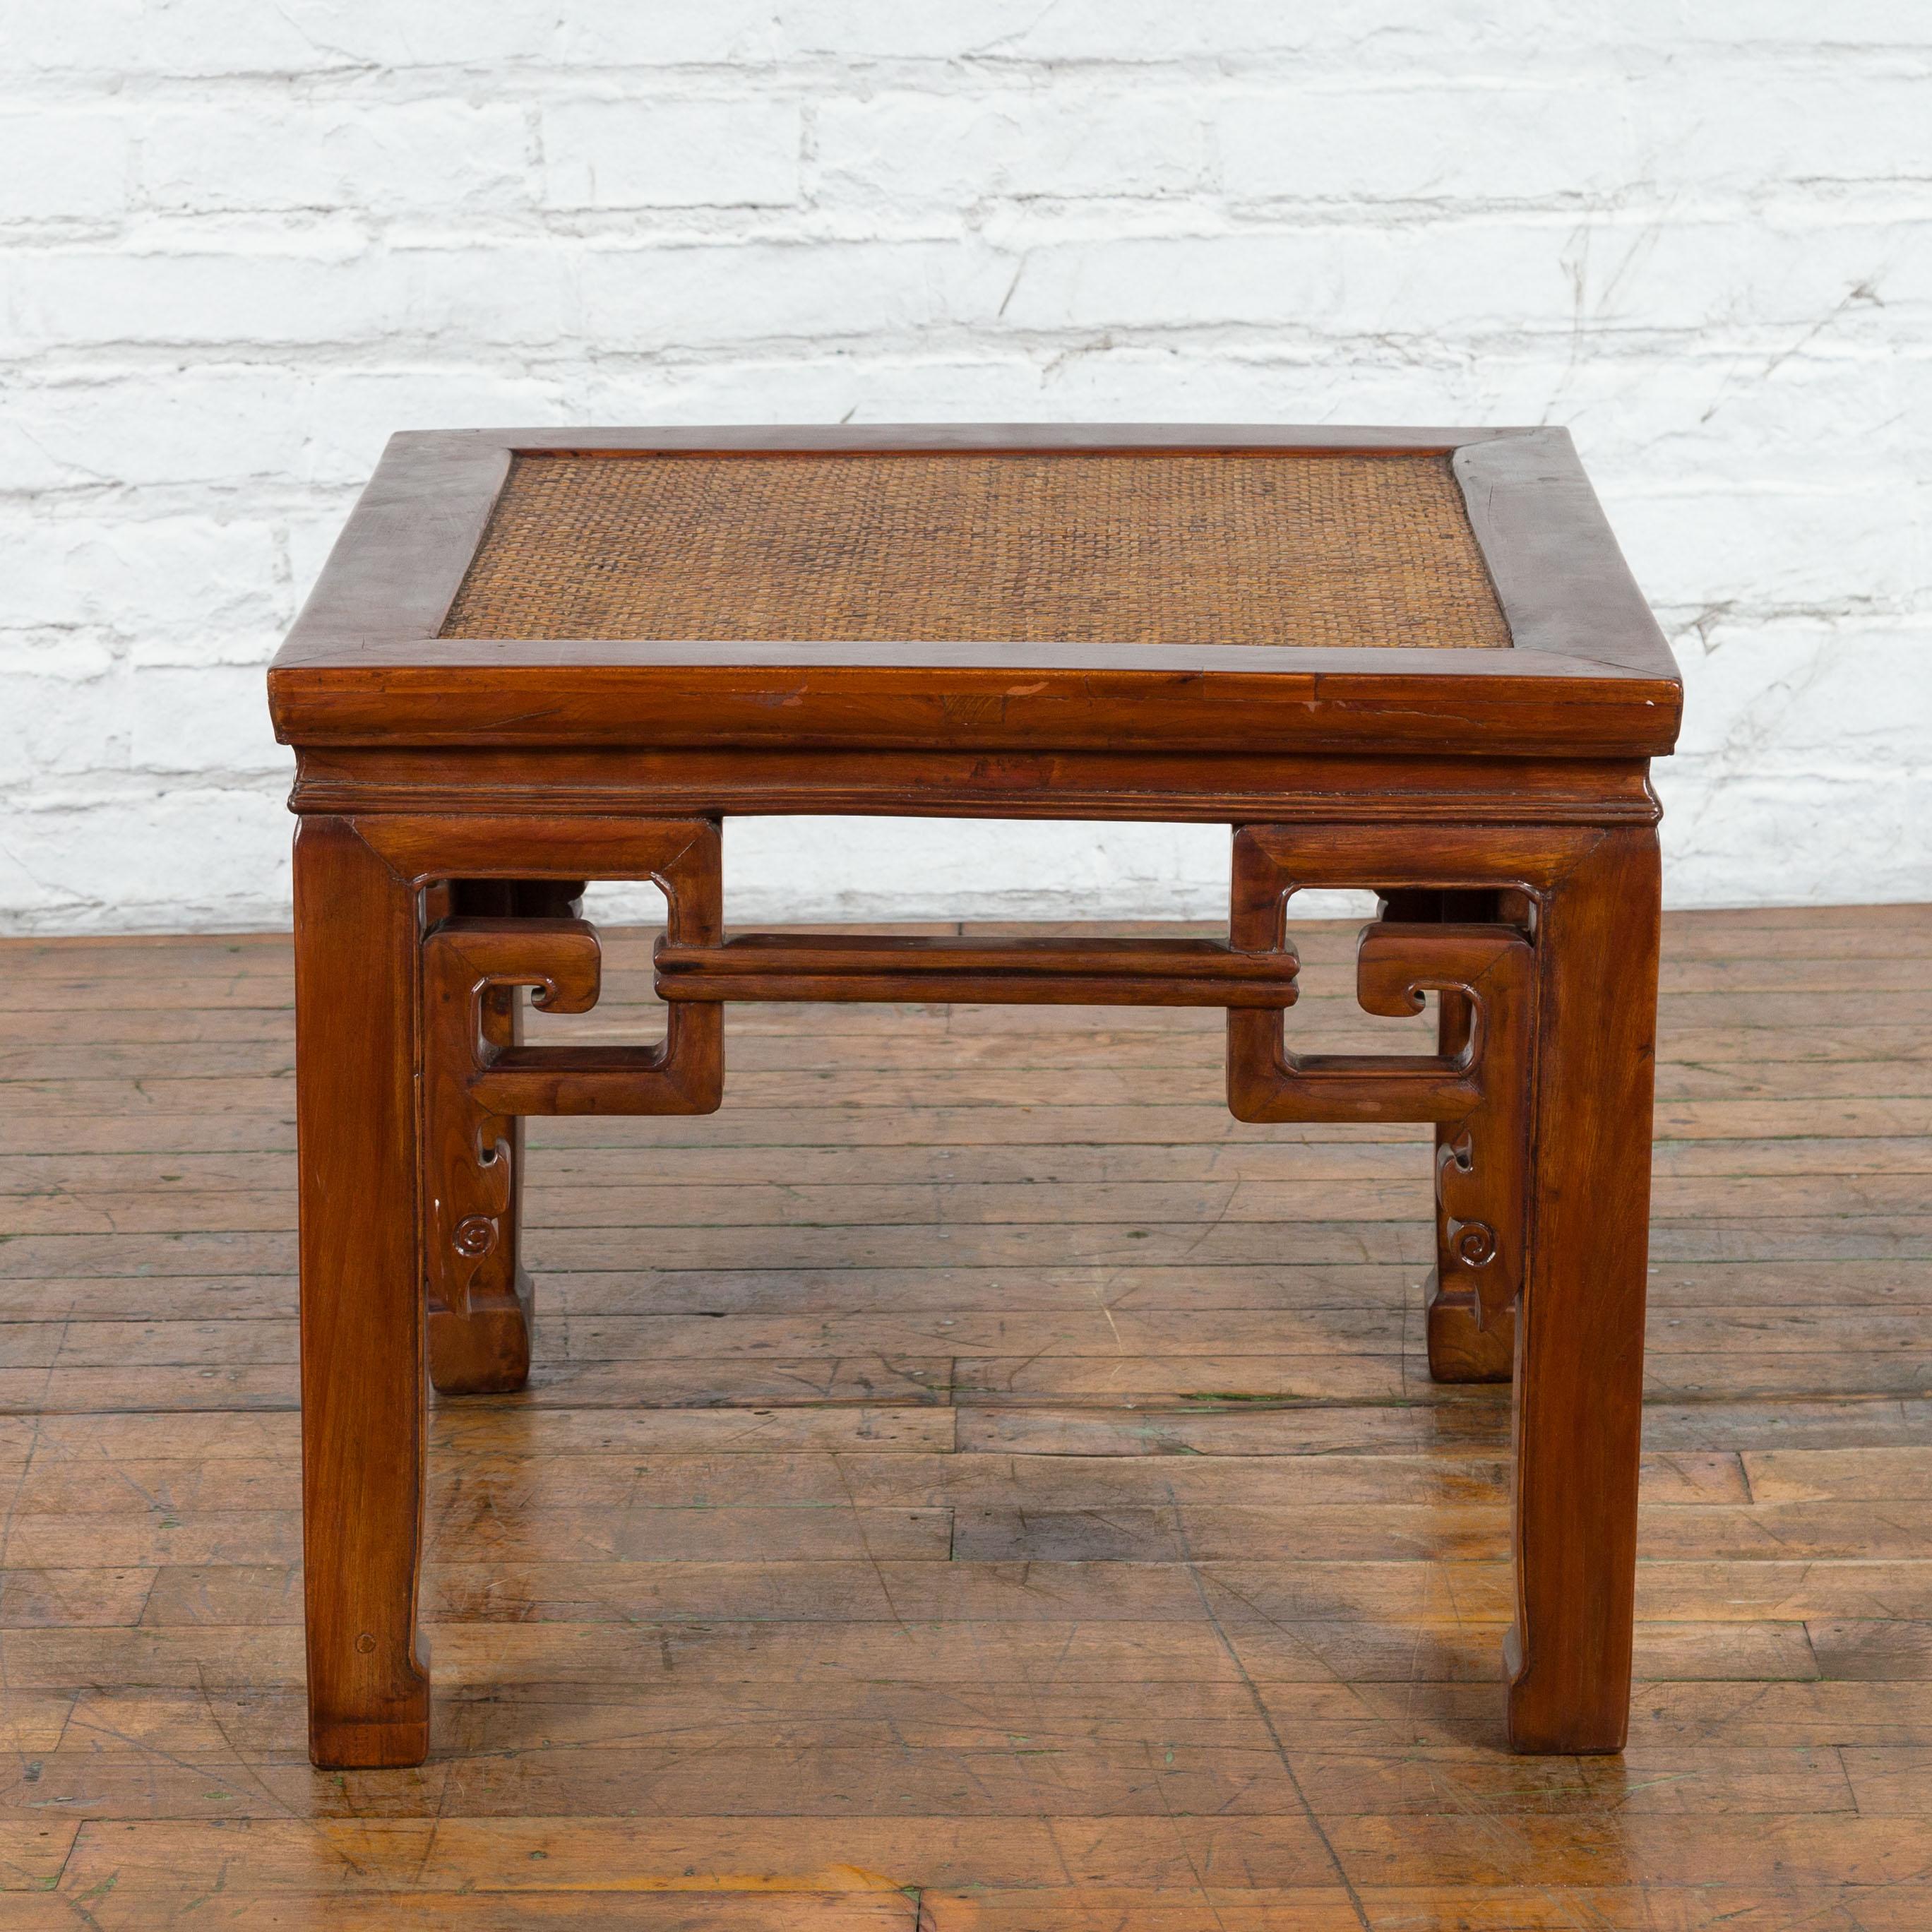 Chinese Qing Dynasty 19th Century Stool or Drinks Table with Woven Rattan Top For Sale 1